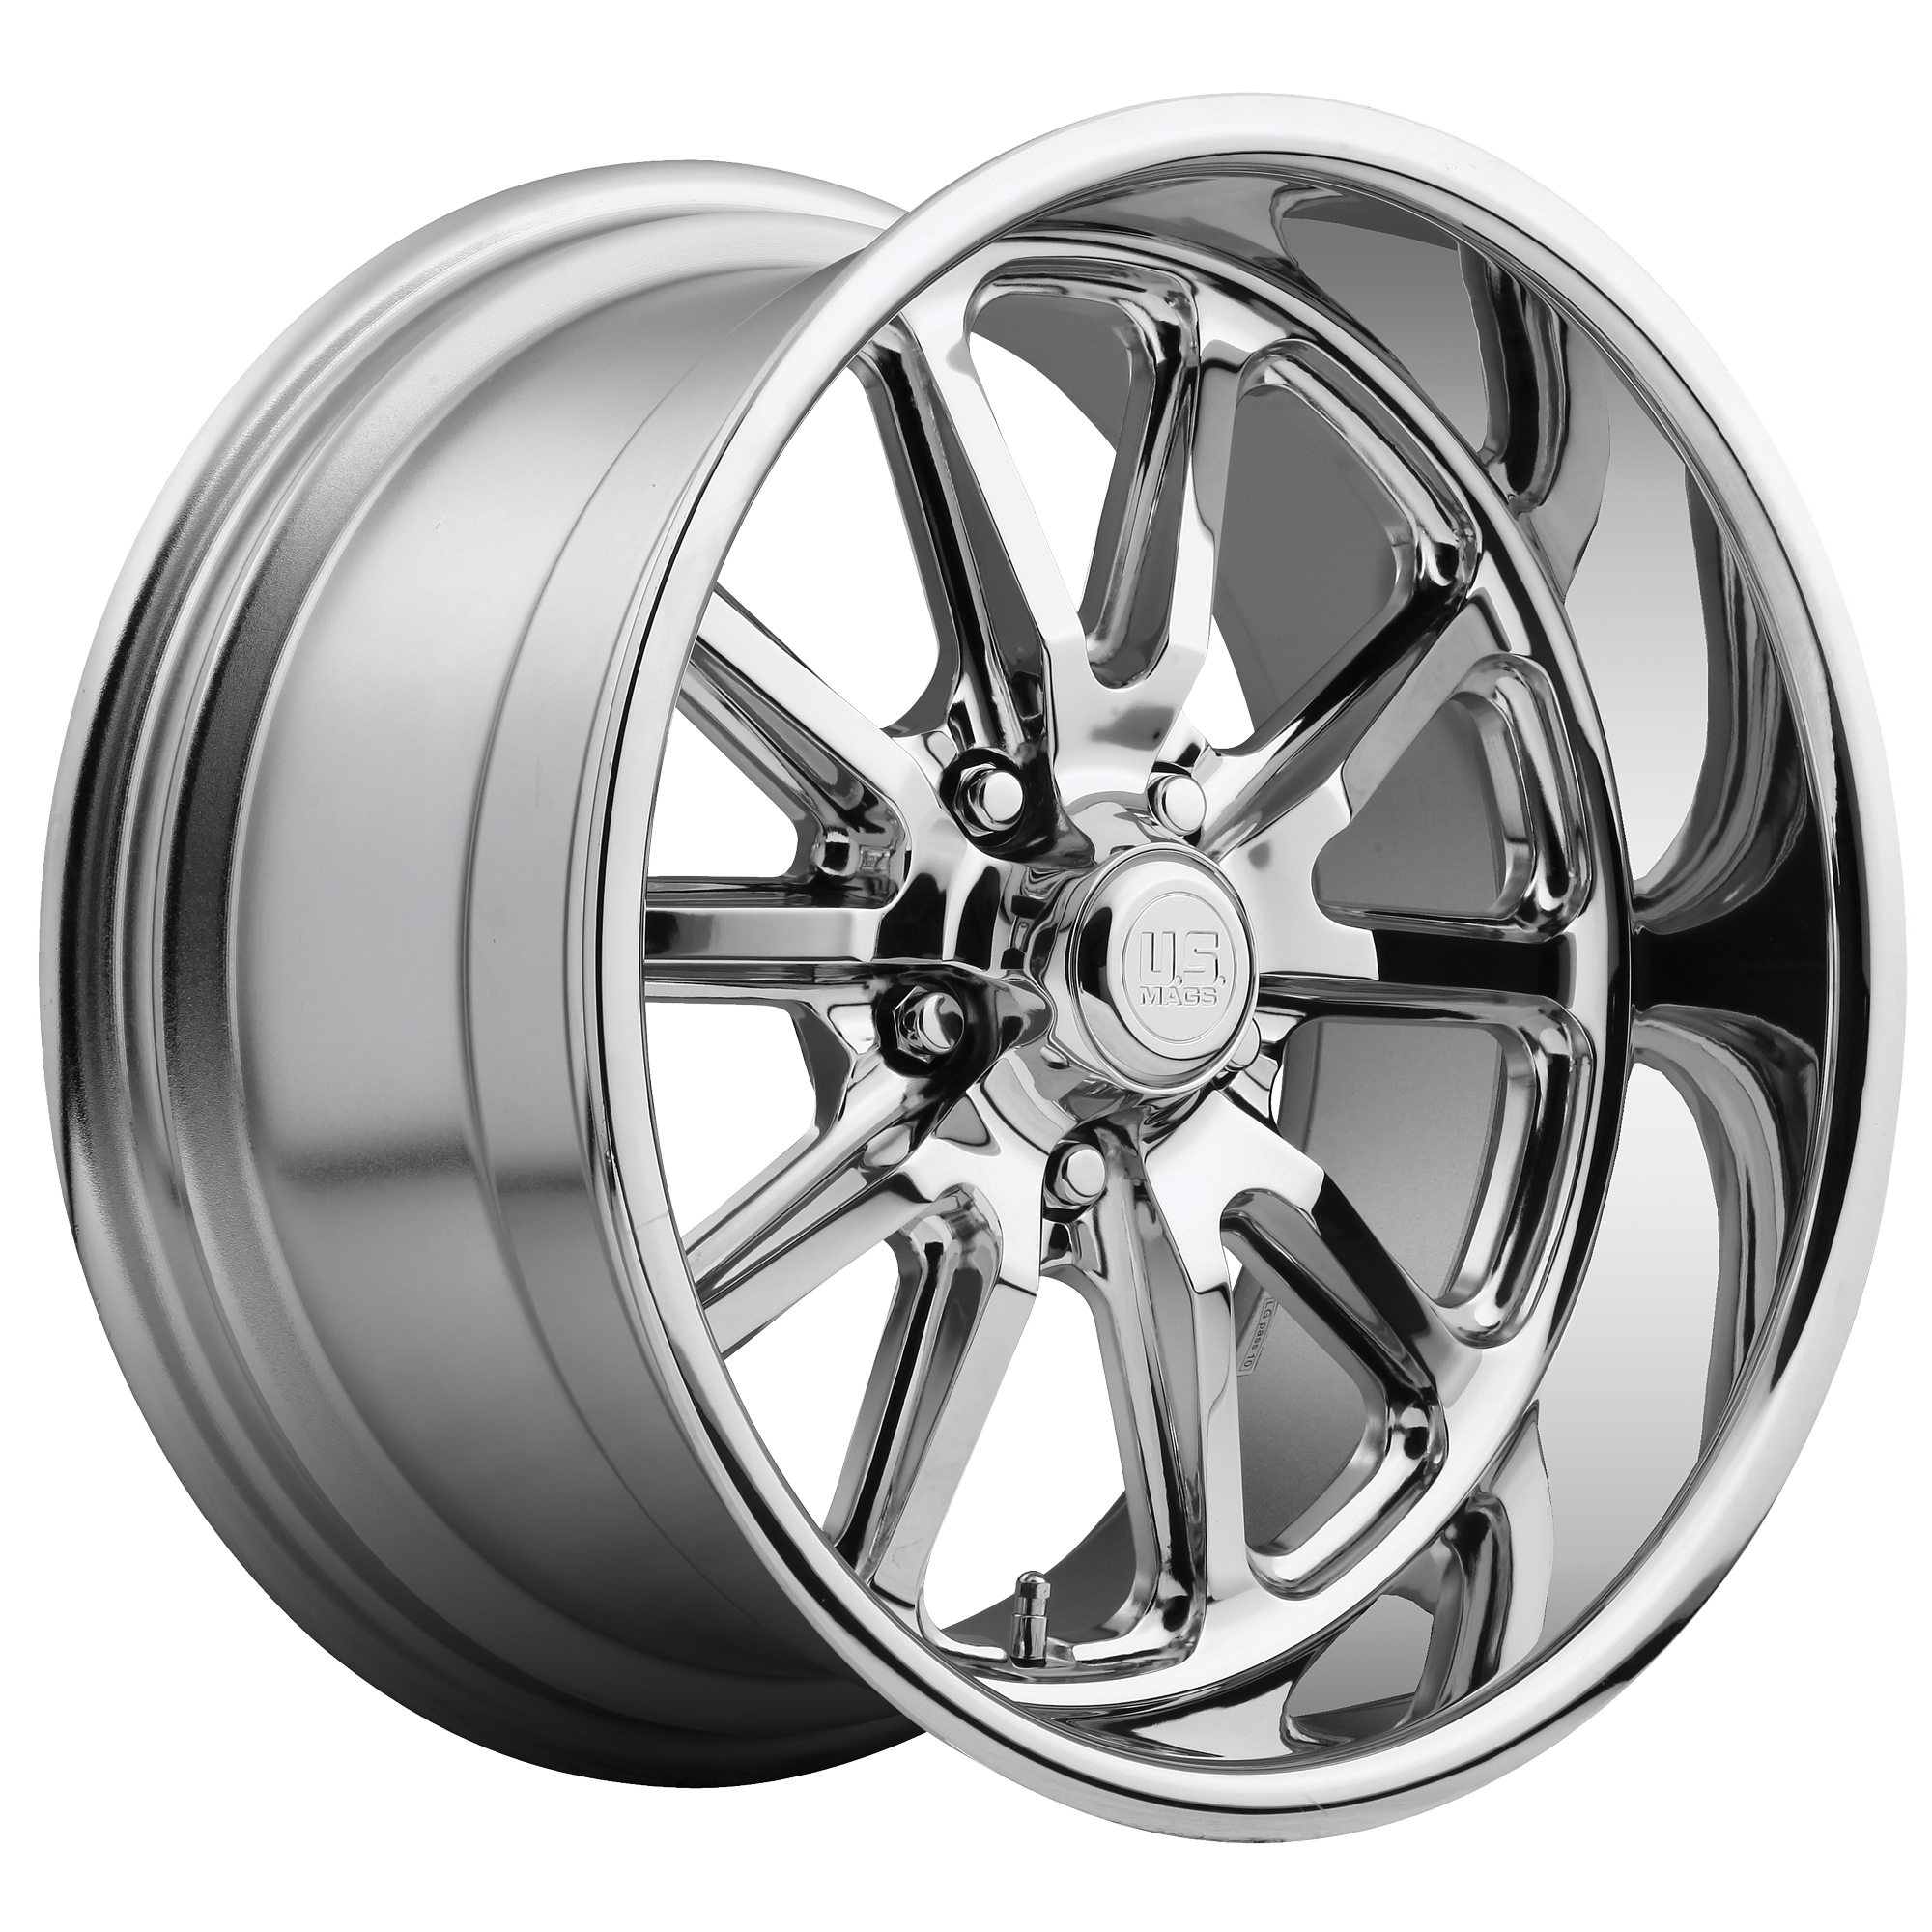 RAMBLER 18x9.5 5x127.00 CHROME PLATED (1 mm) - Tires and Engine Performance